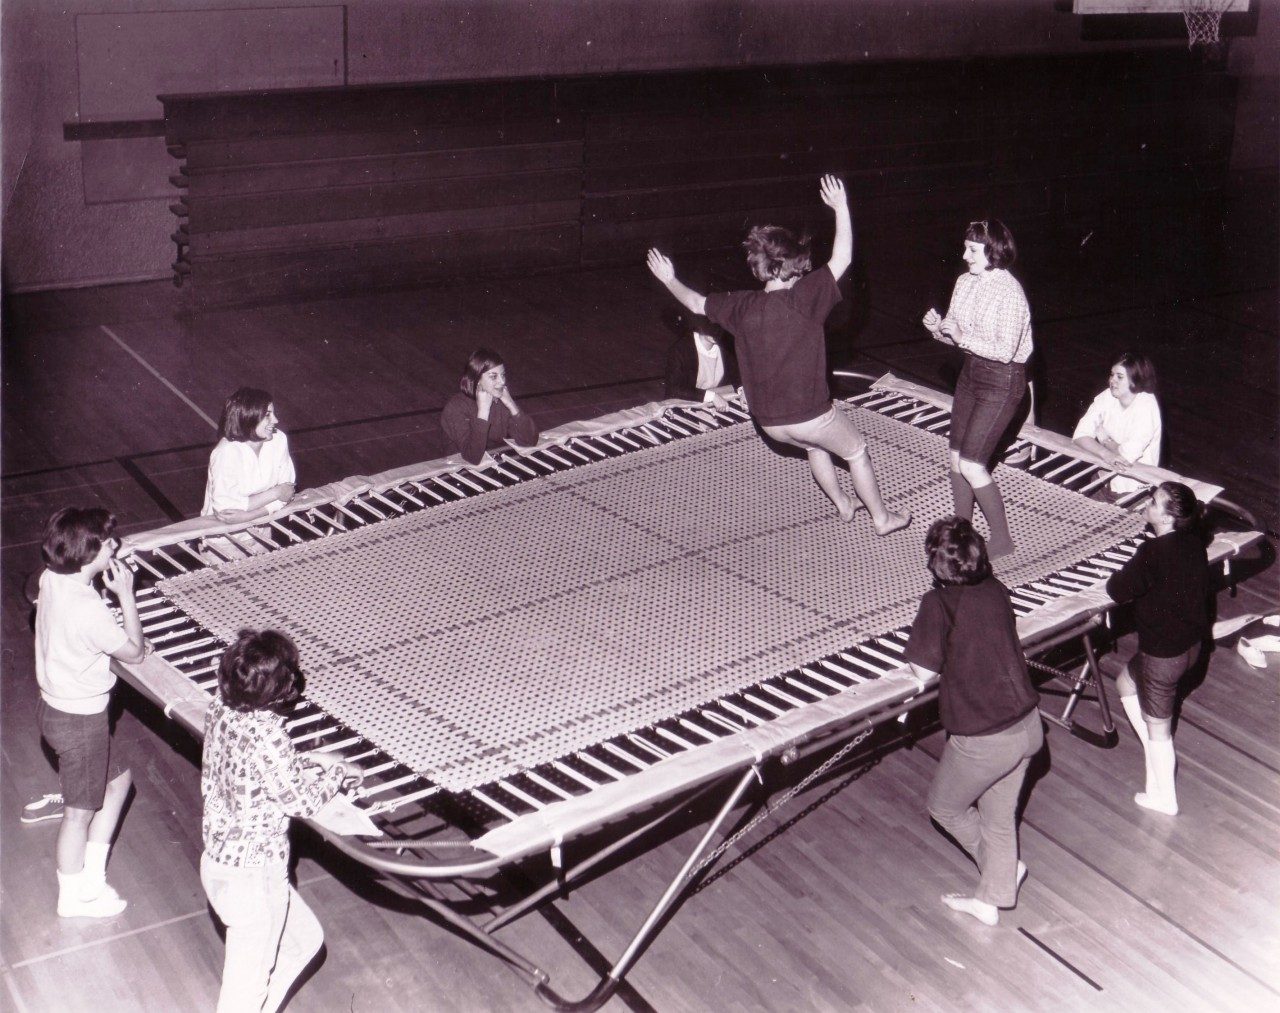 Women on trampoline in Howard Hall, 1965 (University Archives photo, click to enlarge)